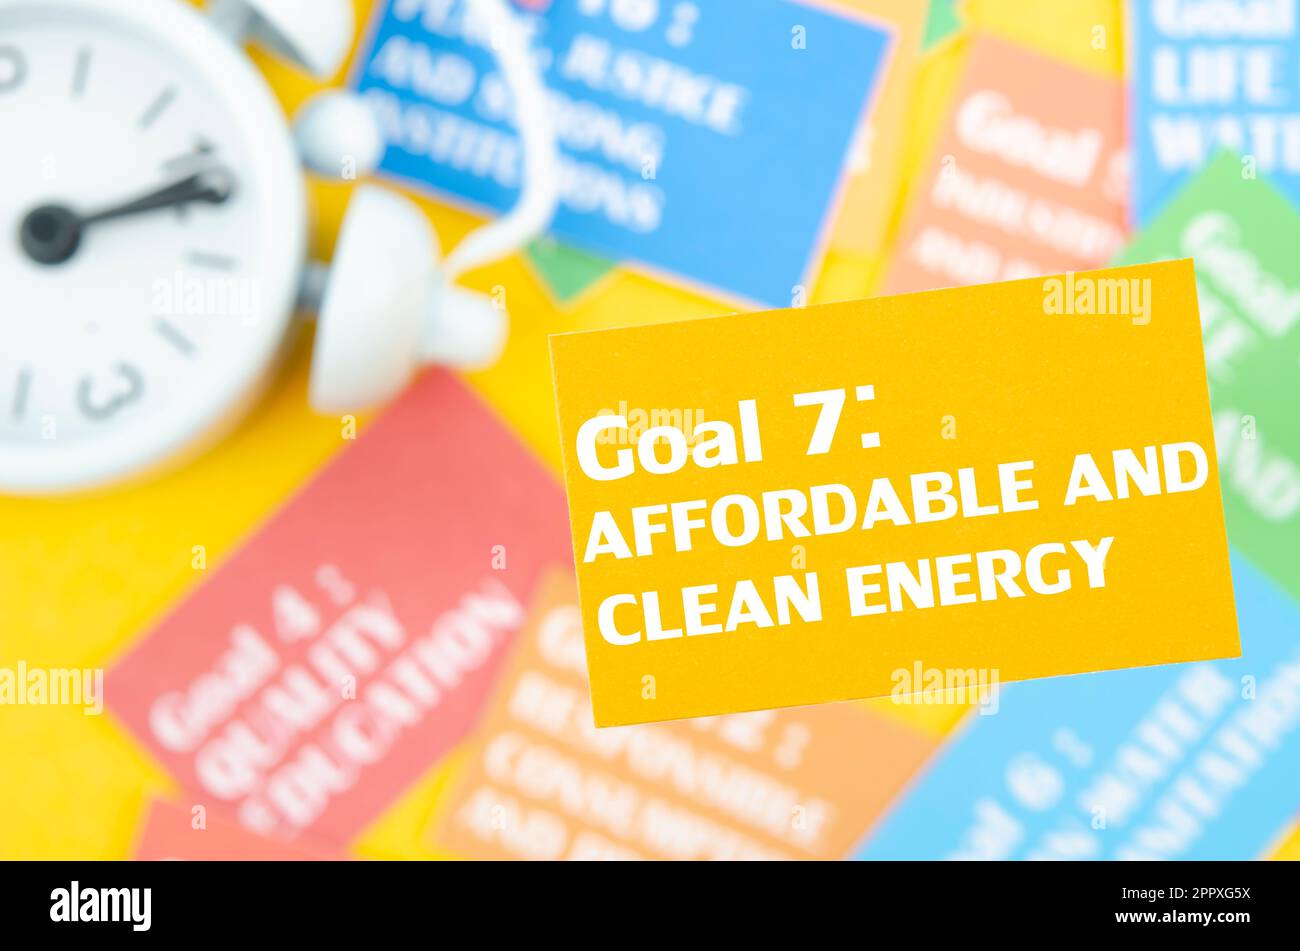 Goal 7 : Affordable and clean energy. The SDGs 17 development goals environment. Environment Development concepts. Stock Photo